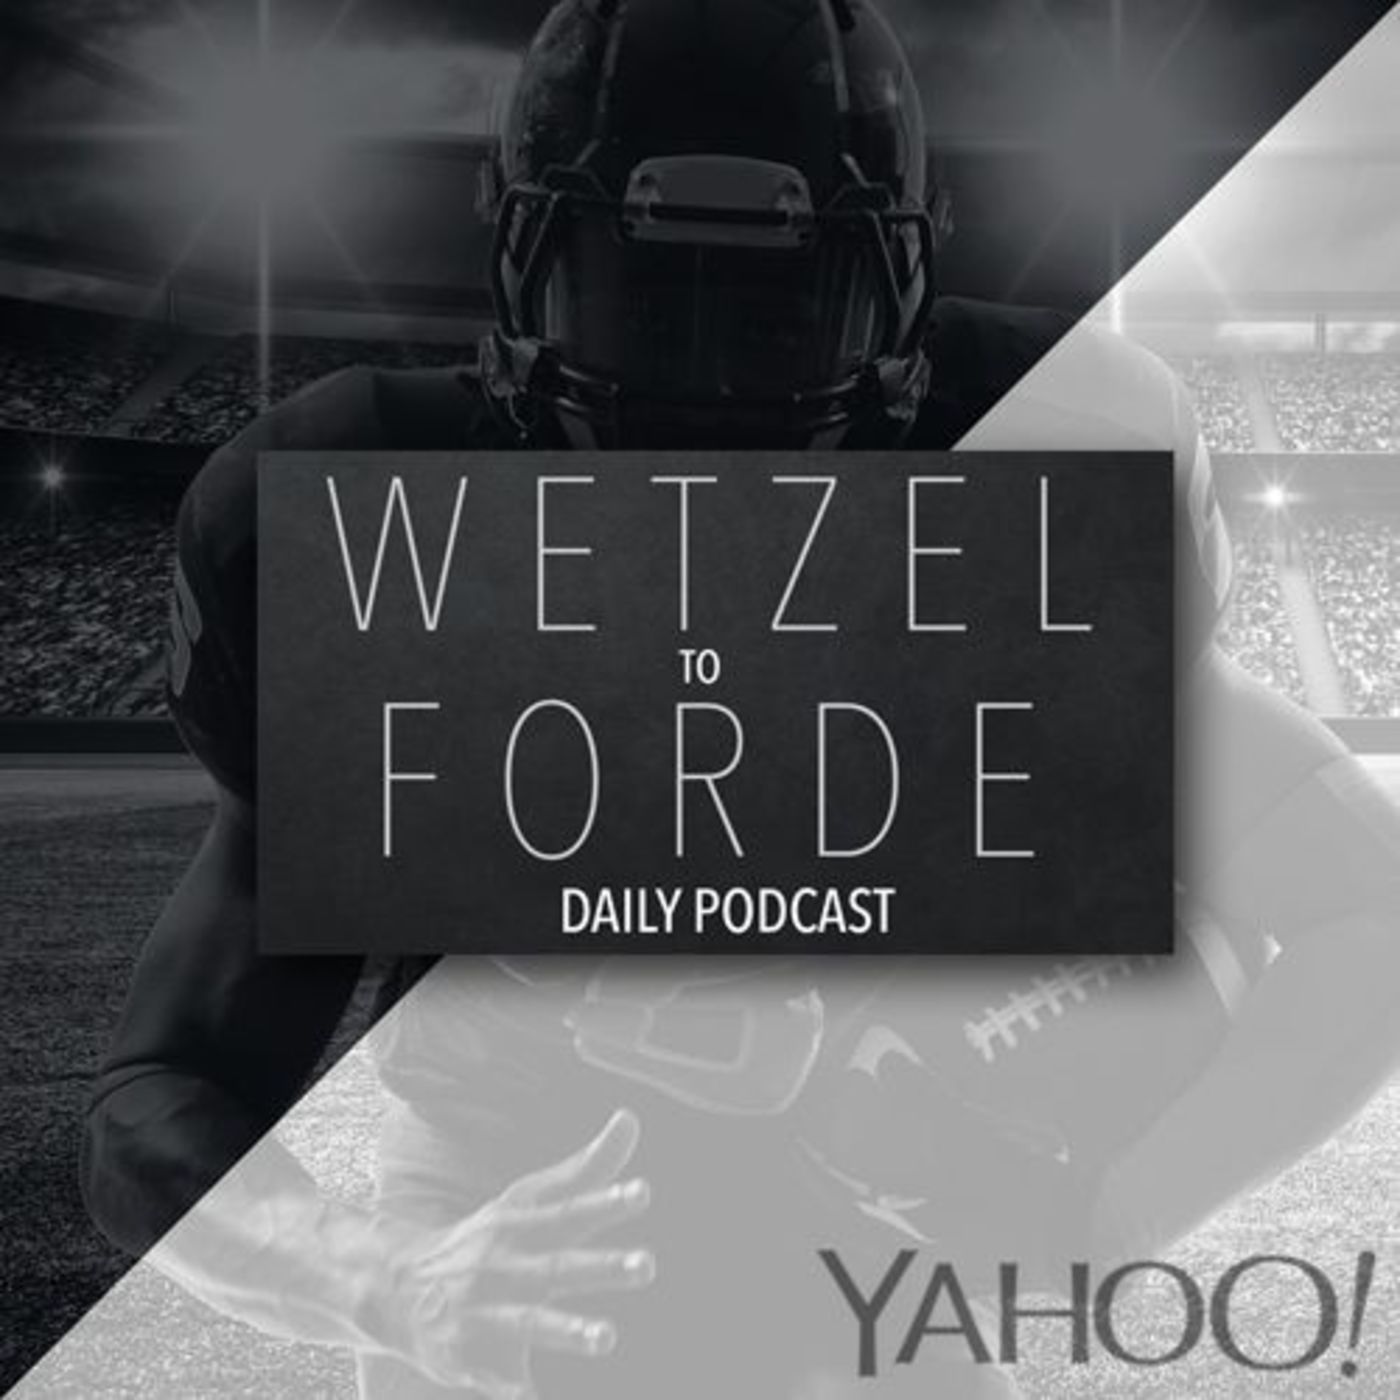 Is the Ronda Rousey backlash fair? Wetzel To Forde (11 - 17 - 15)